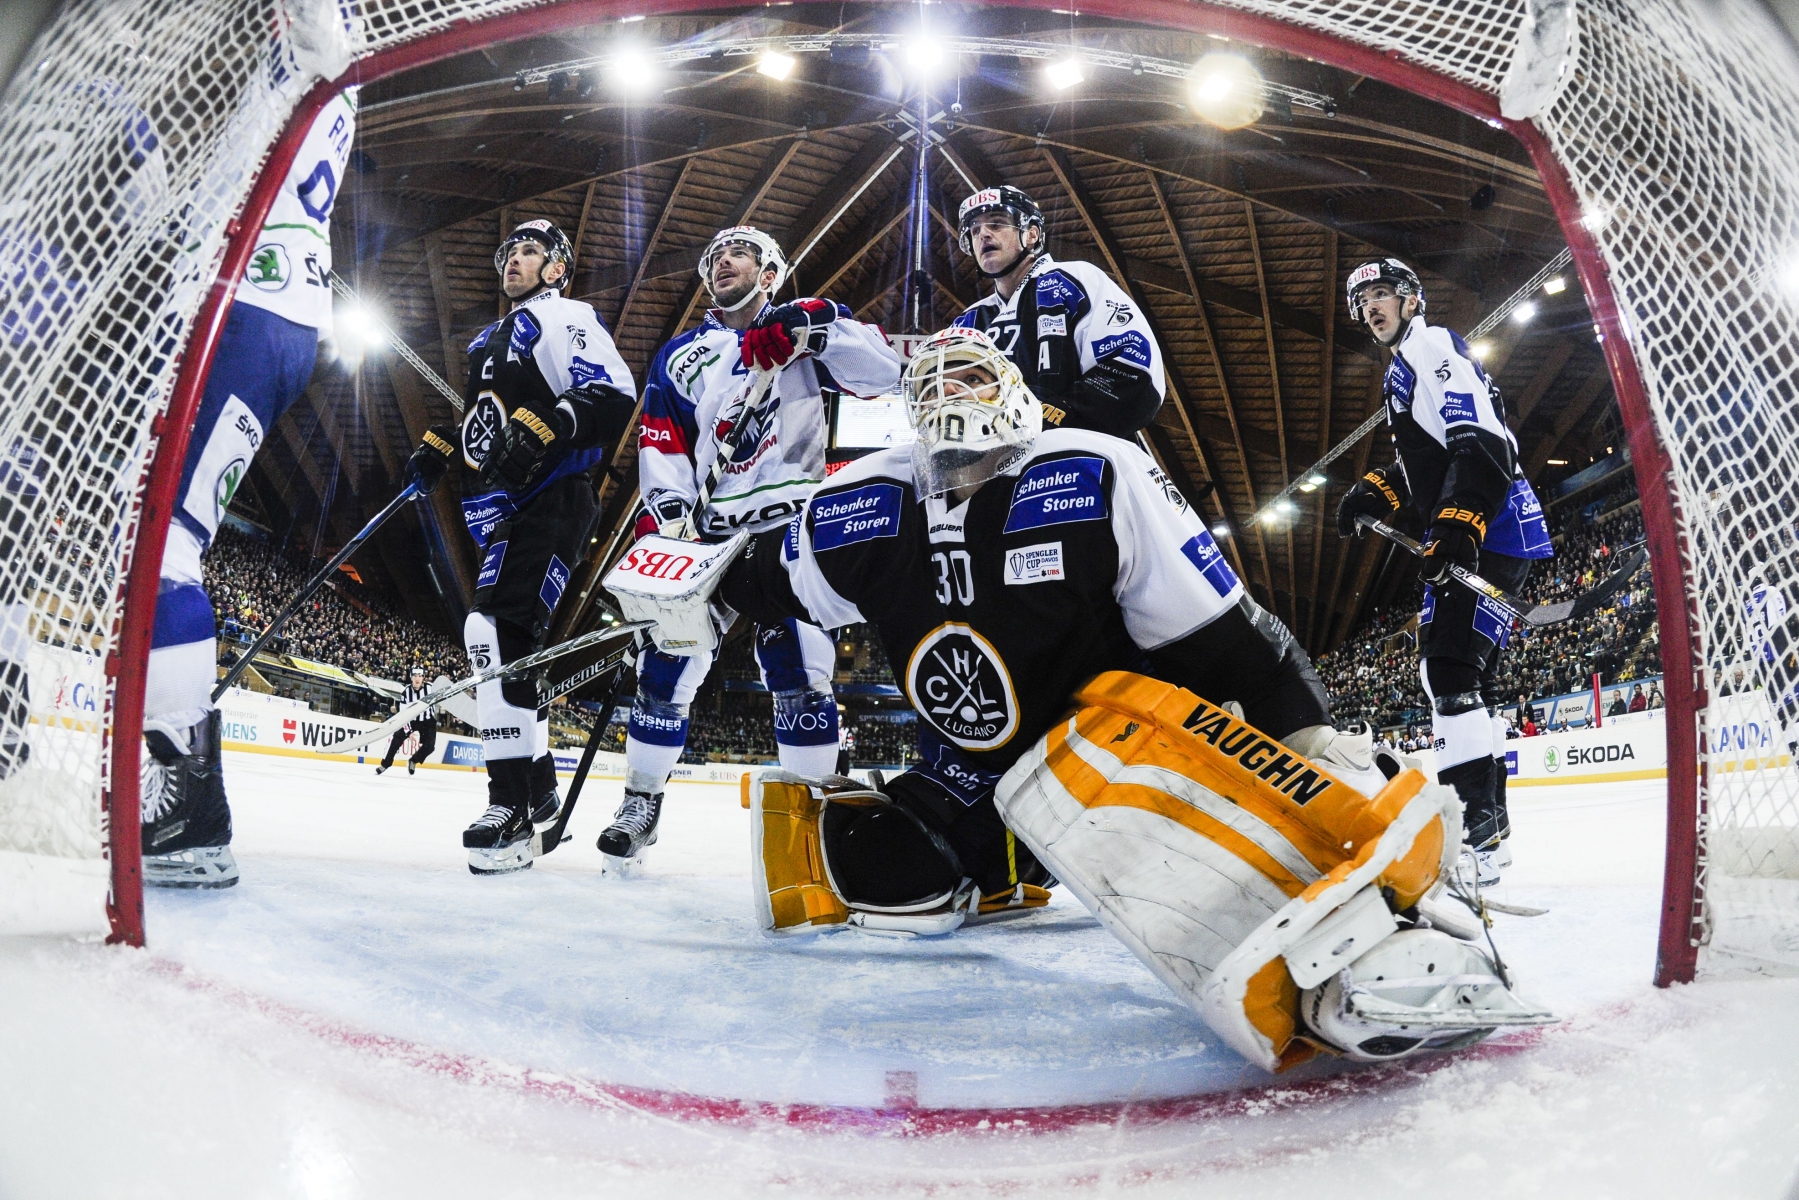 Lugano's goalkeeper Elvis Merzlikins, center, is pictured during the game between Switzerland's HC Lugano and Germany's Adler Mannheim, at the 89th Spengler Cup ice hockey tournament in Davos, Switzerland, on Saturday, December 26, 2015. (KEYSTONE/Gian Ehrenzeller)